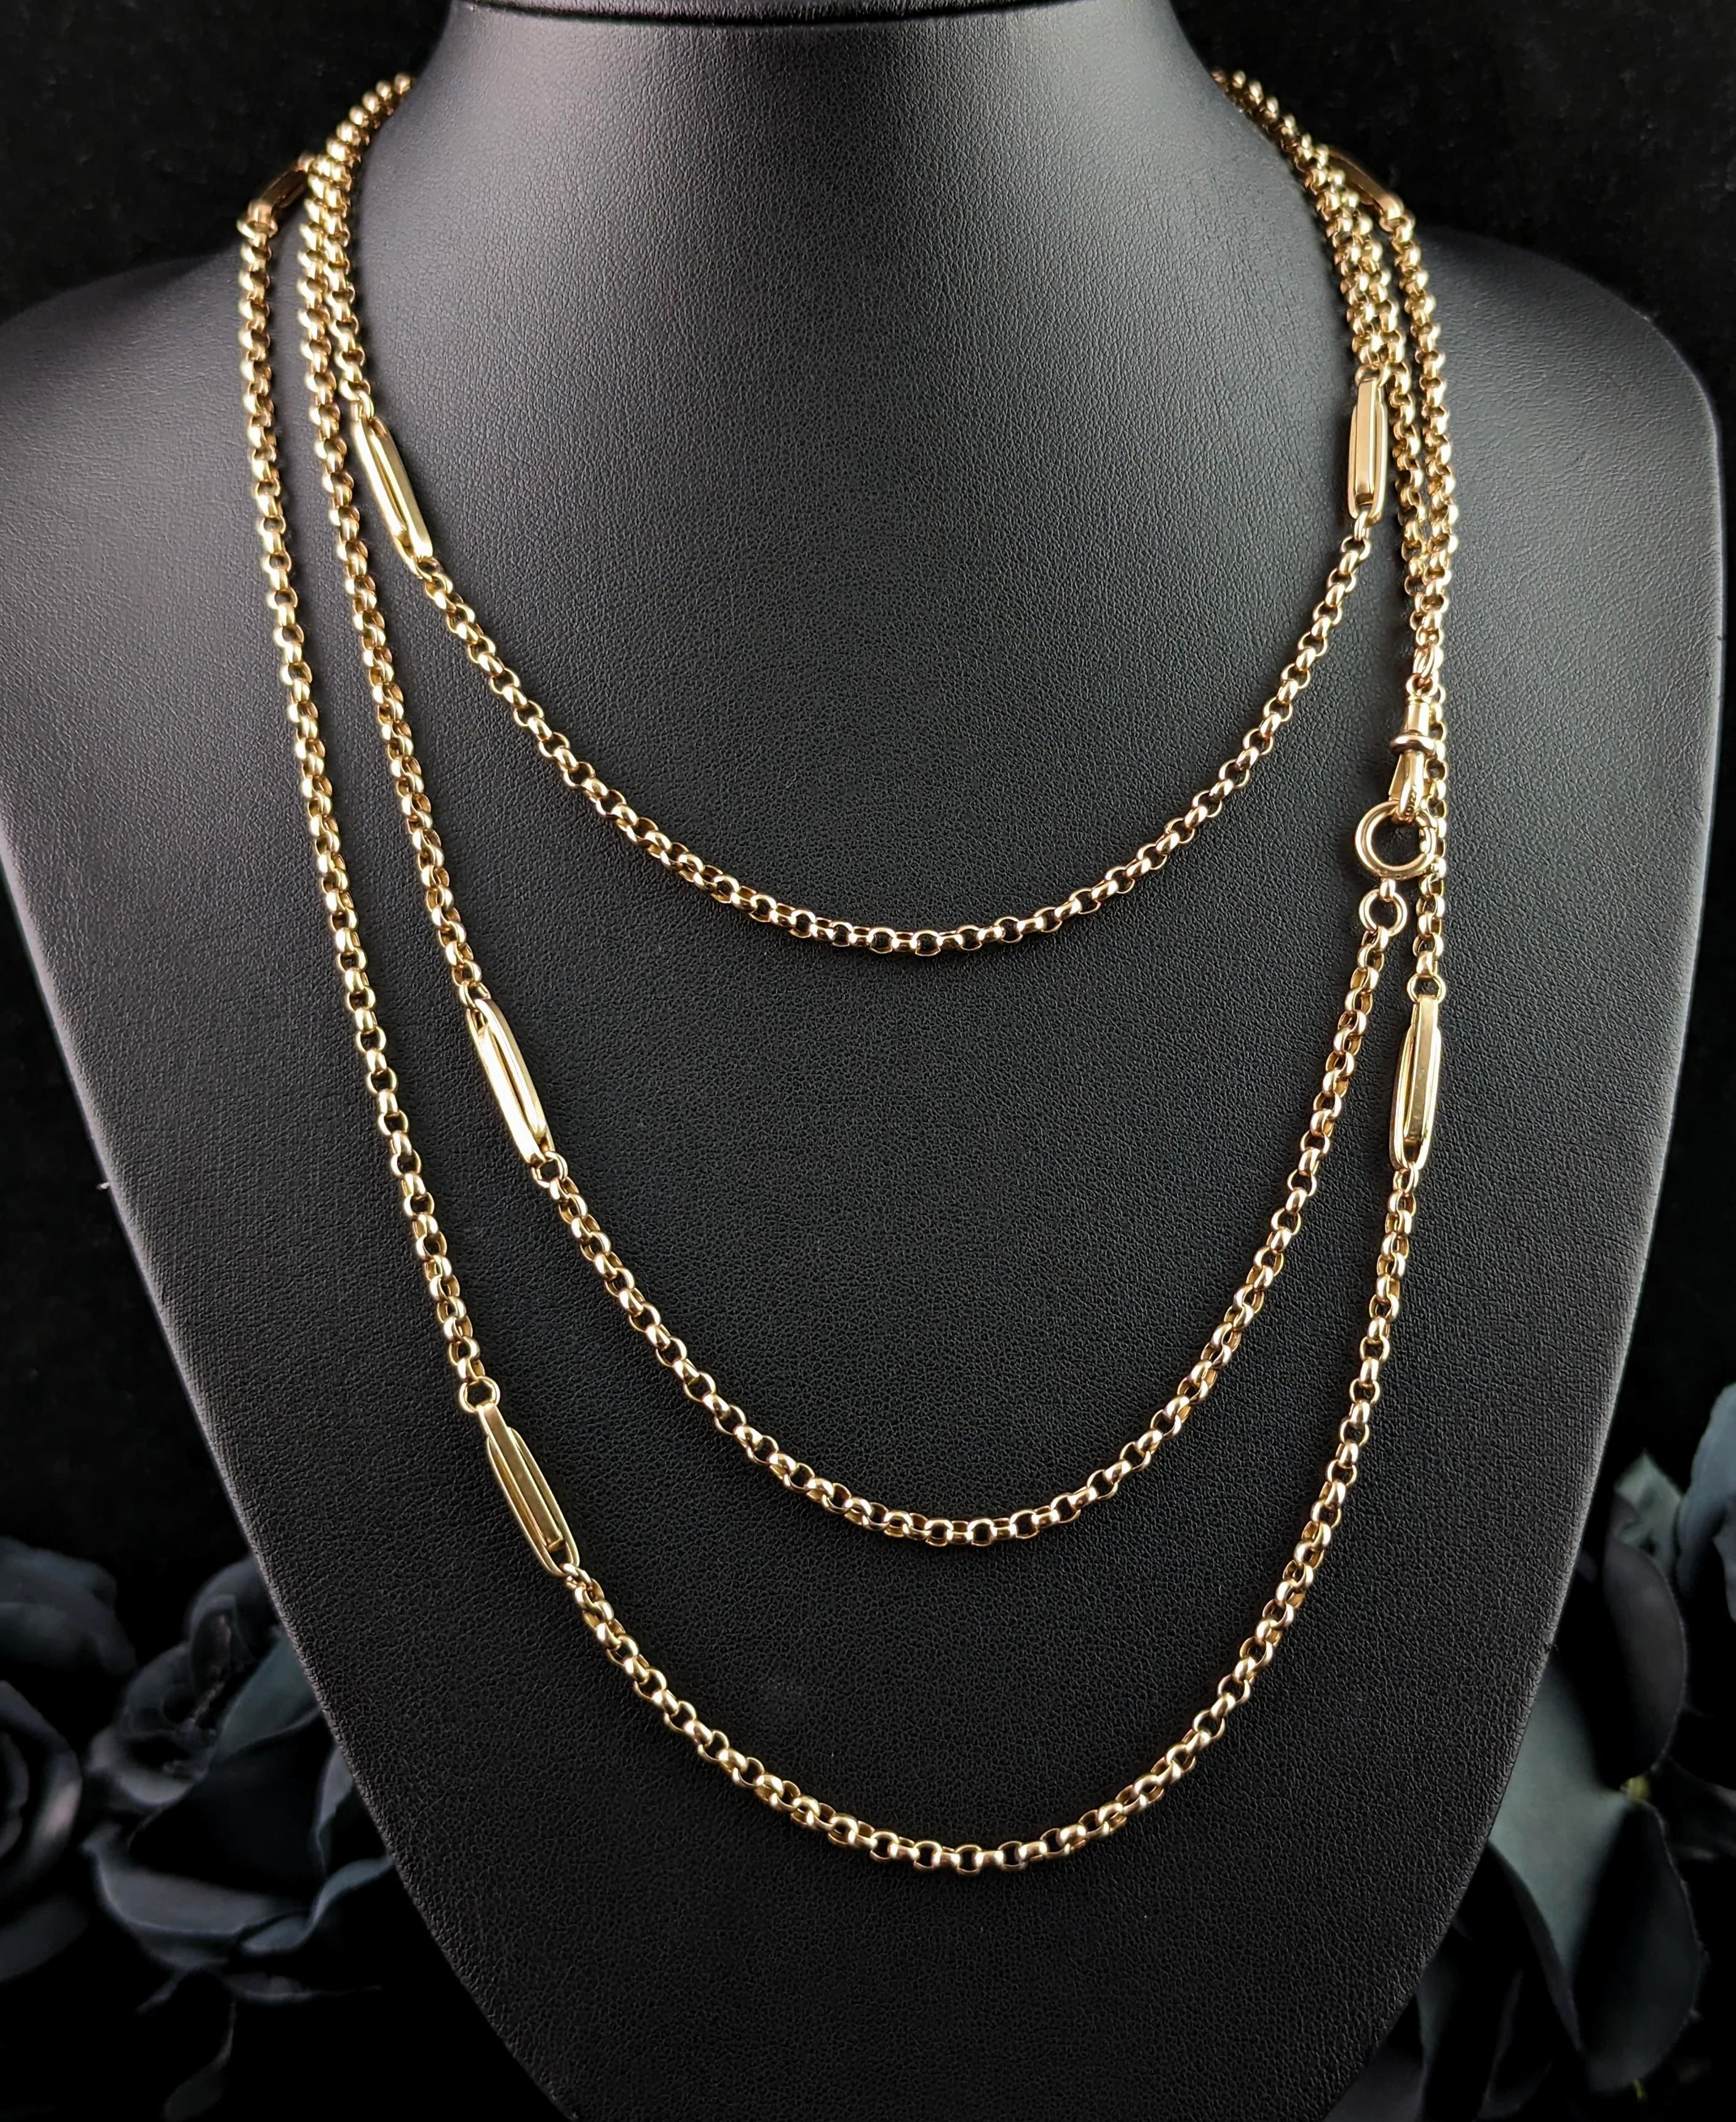 This stunning antique, Victorian 9kt yellow gold, fancy link longuard chain is sure to turn some heads.

We love a good long chain here, such a versatile and wearable piece of jewellery, this one is no exception.

Stunning oval belcher or rolo links